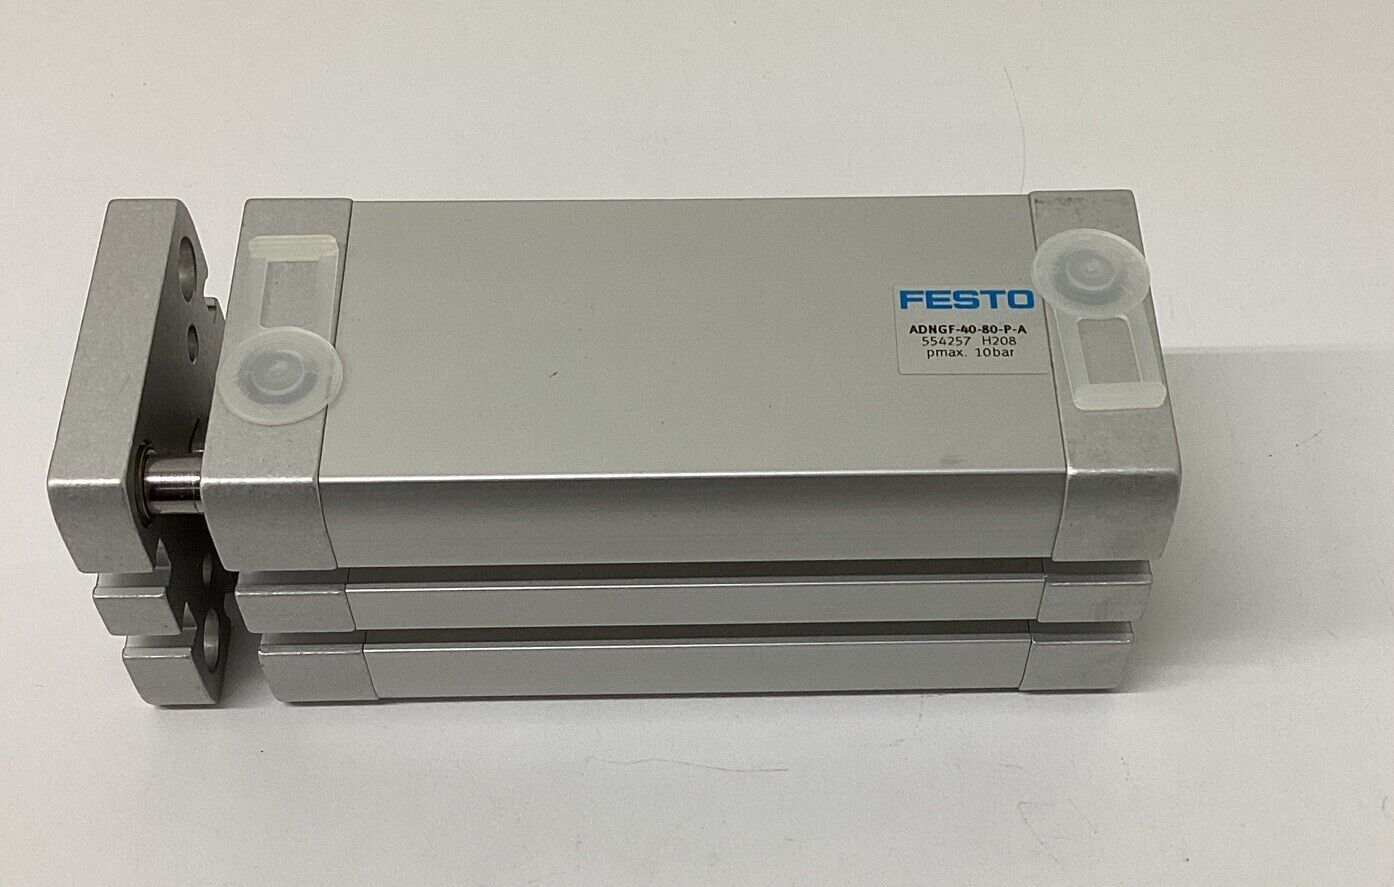 Festo ADNGF-40-80-P-A / 554257 Compact Cylinder 40mm Piston x 80mm Stroke BL293